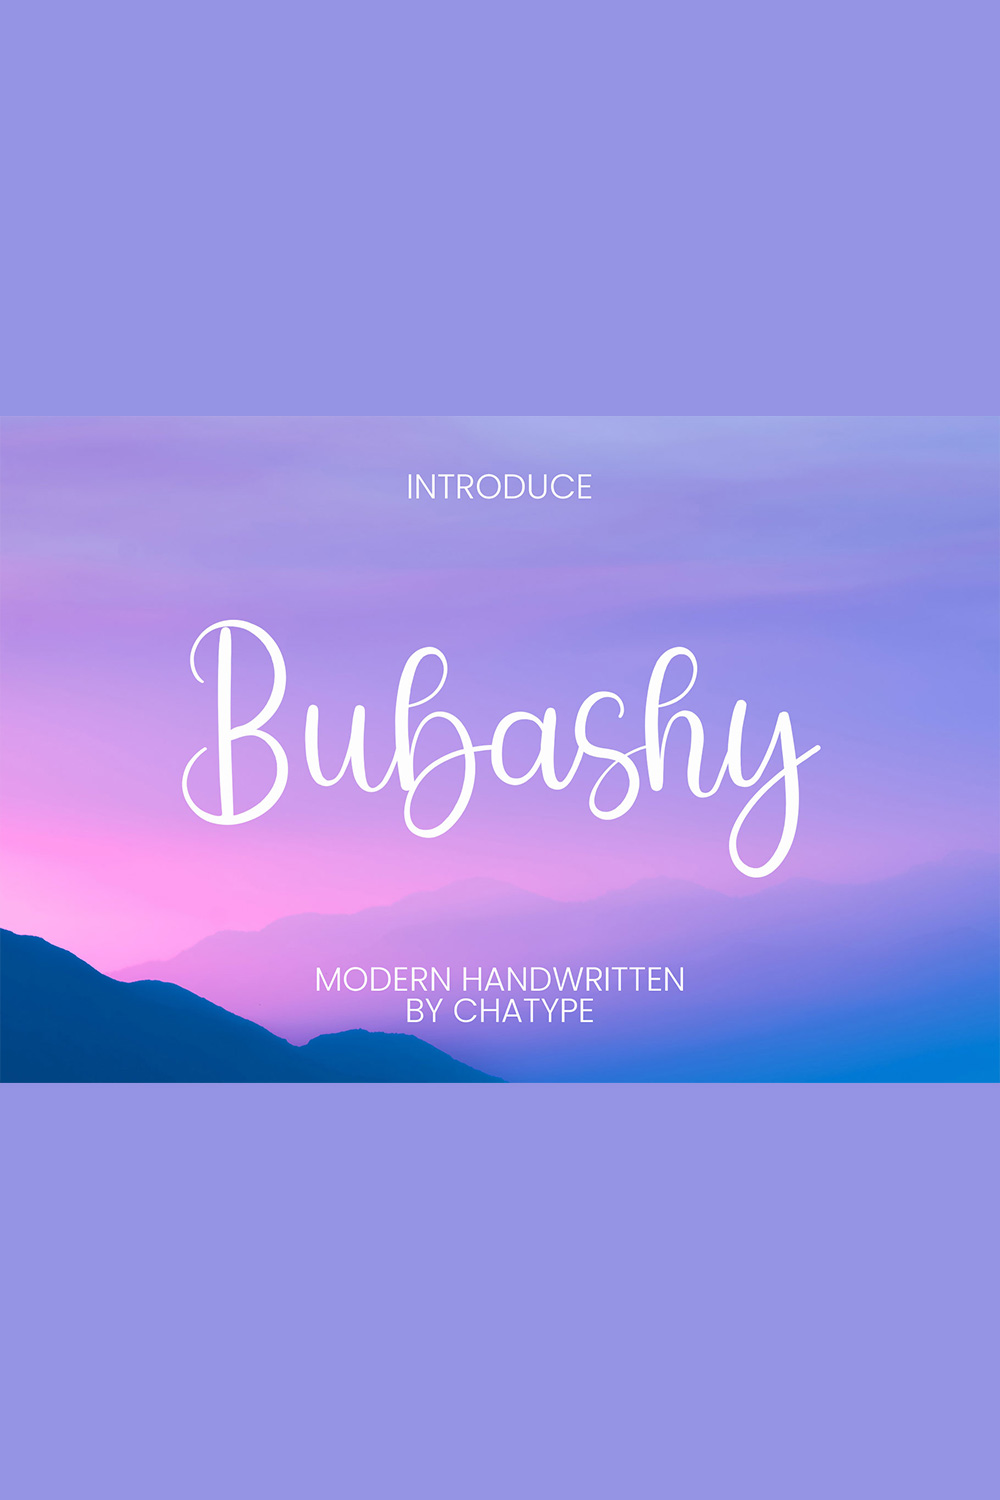 An image with text showing the beautiful Bubashy font